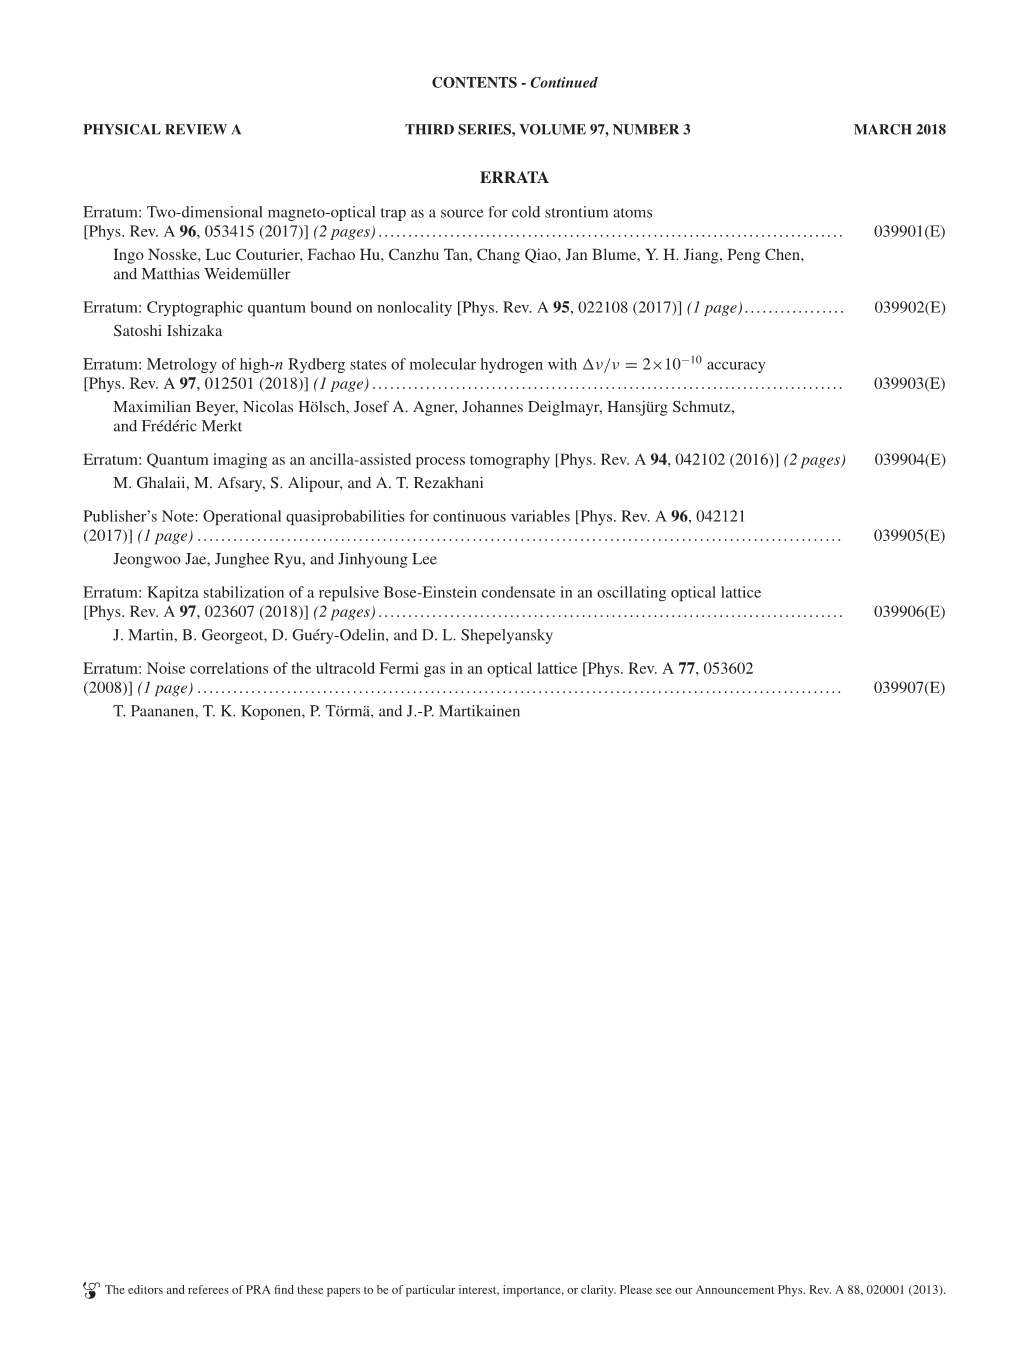 Table of Contents (Print, Part 1)